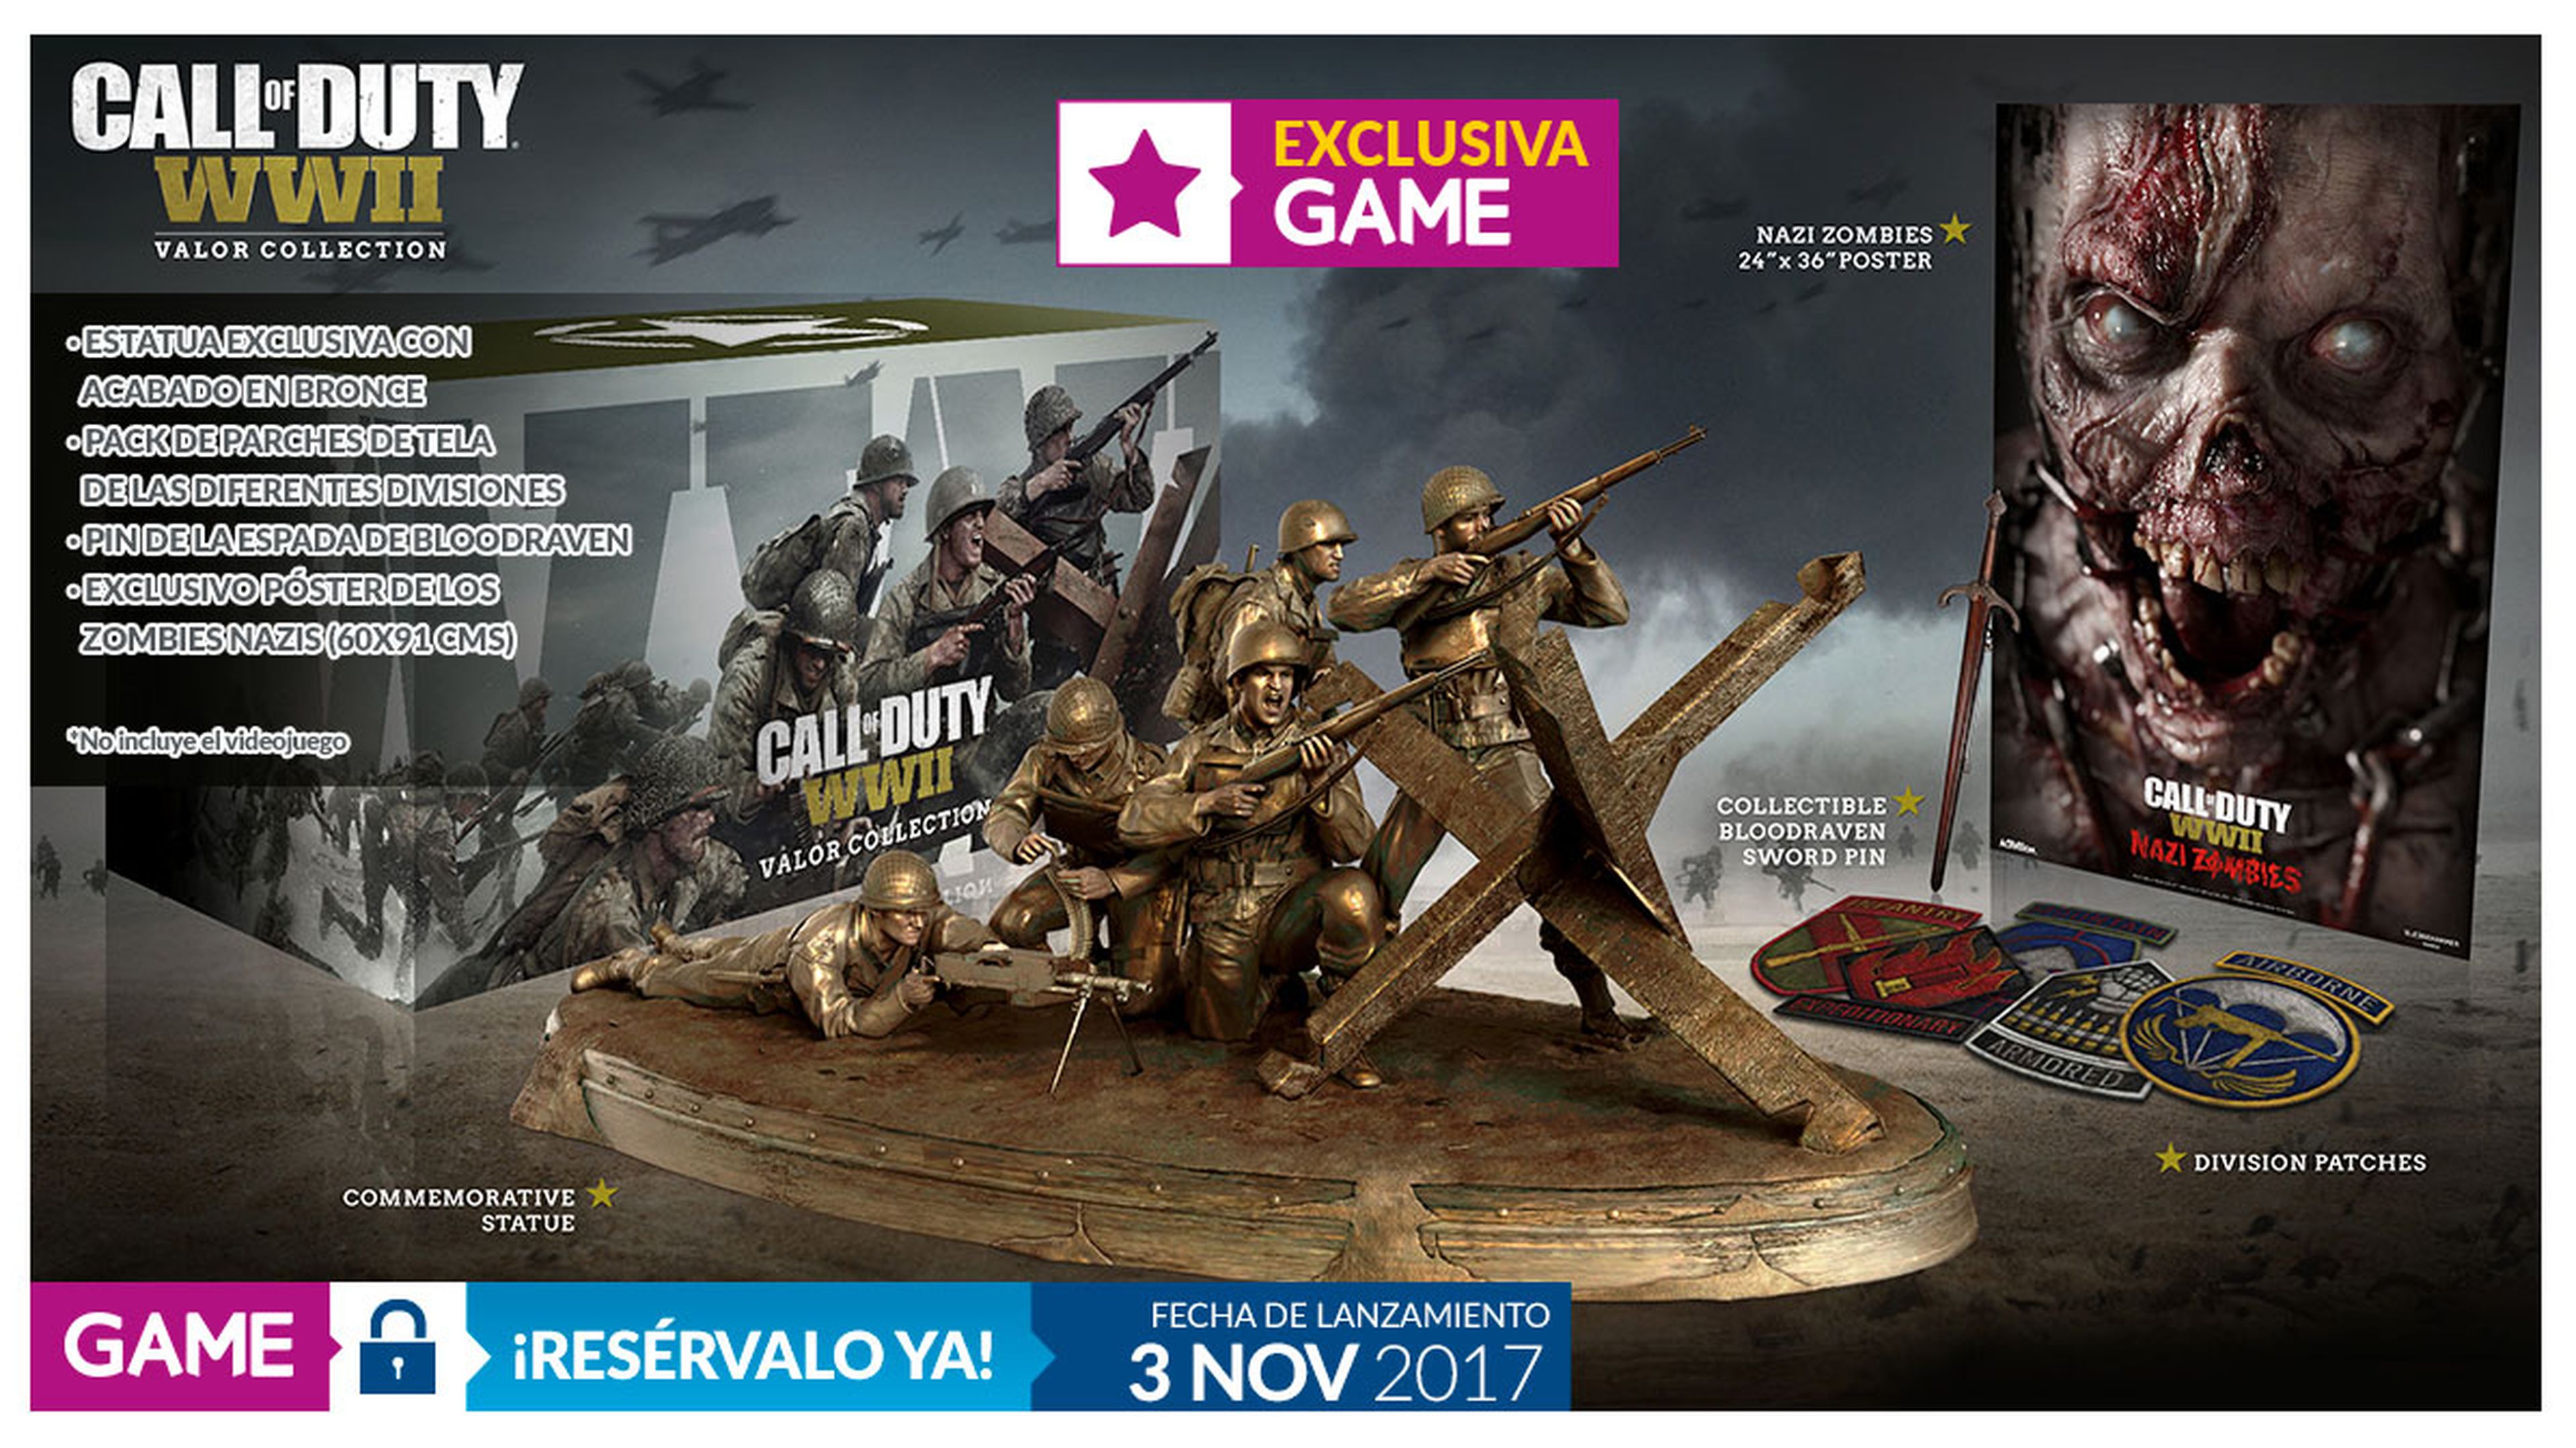  Call of Duty: WWII Pro (PS4) : Videojuegos